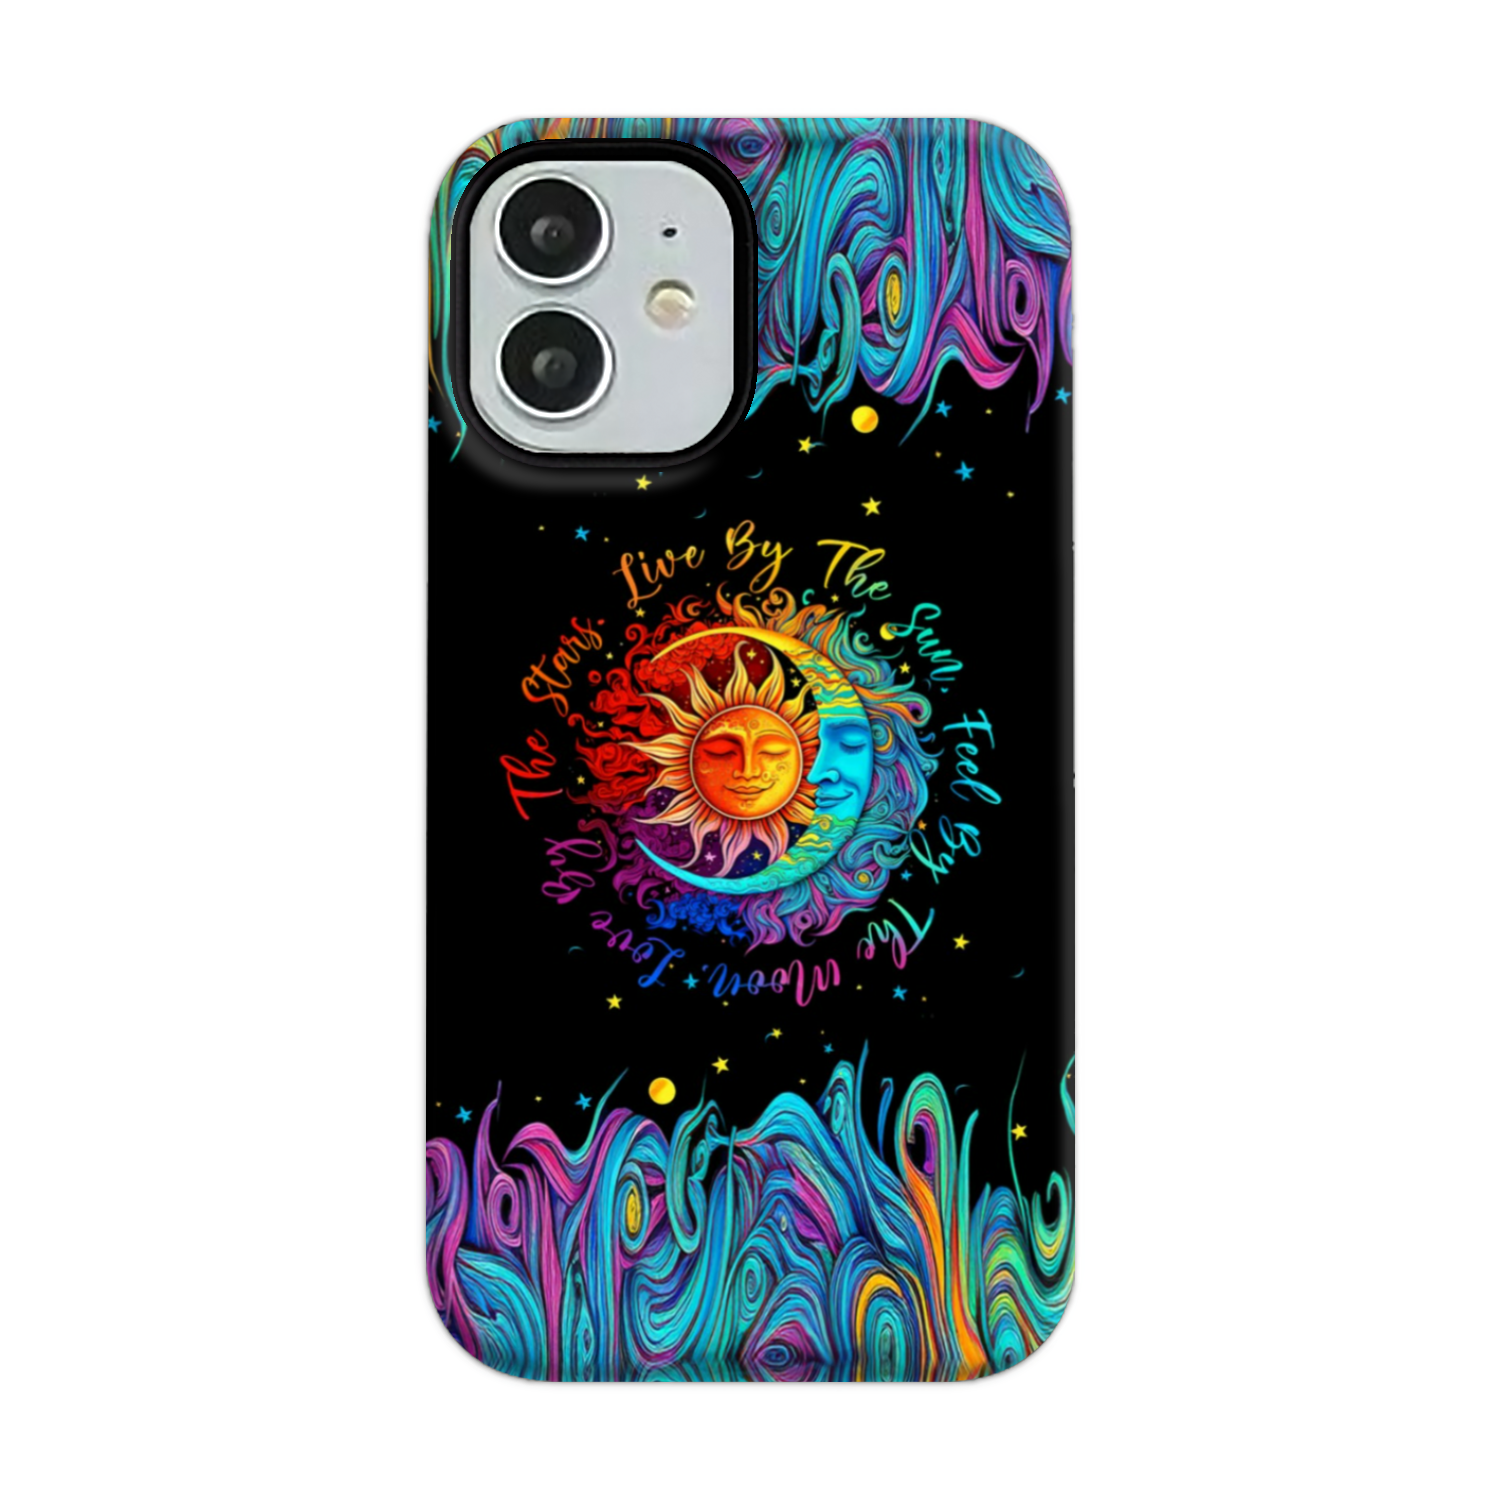 LIVE BY THE SUN PHONE CASE - TYTW1503237